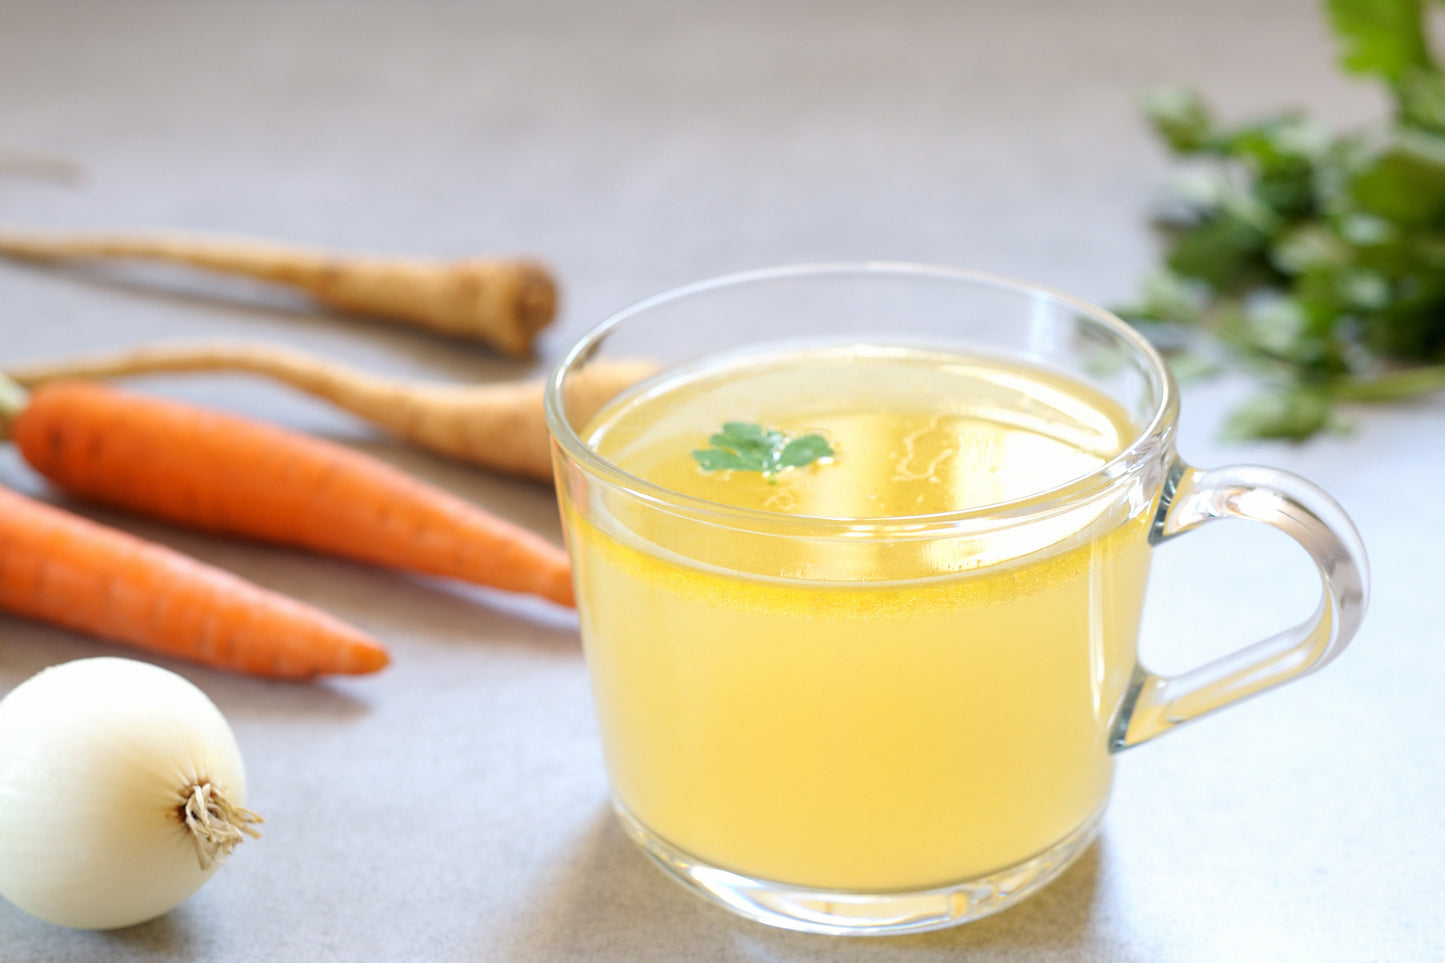 Bone Broth vs. Stock: What Are the Differences?